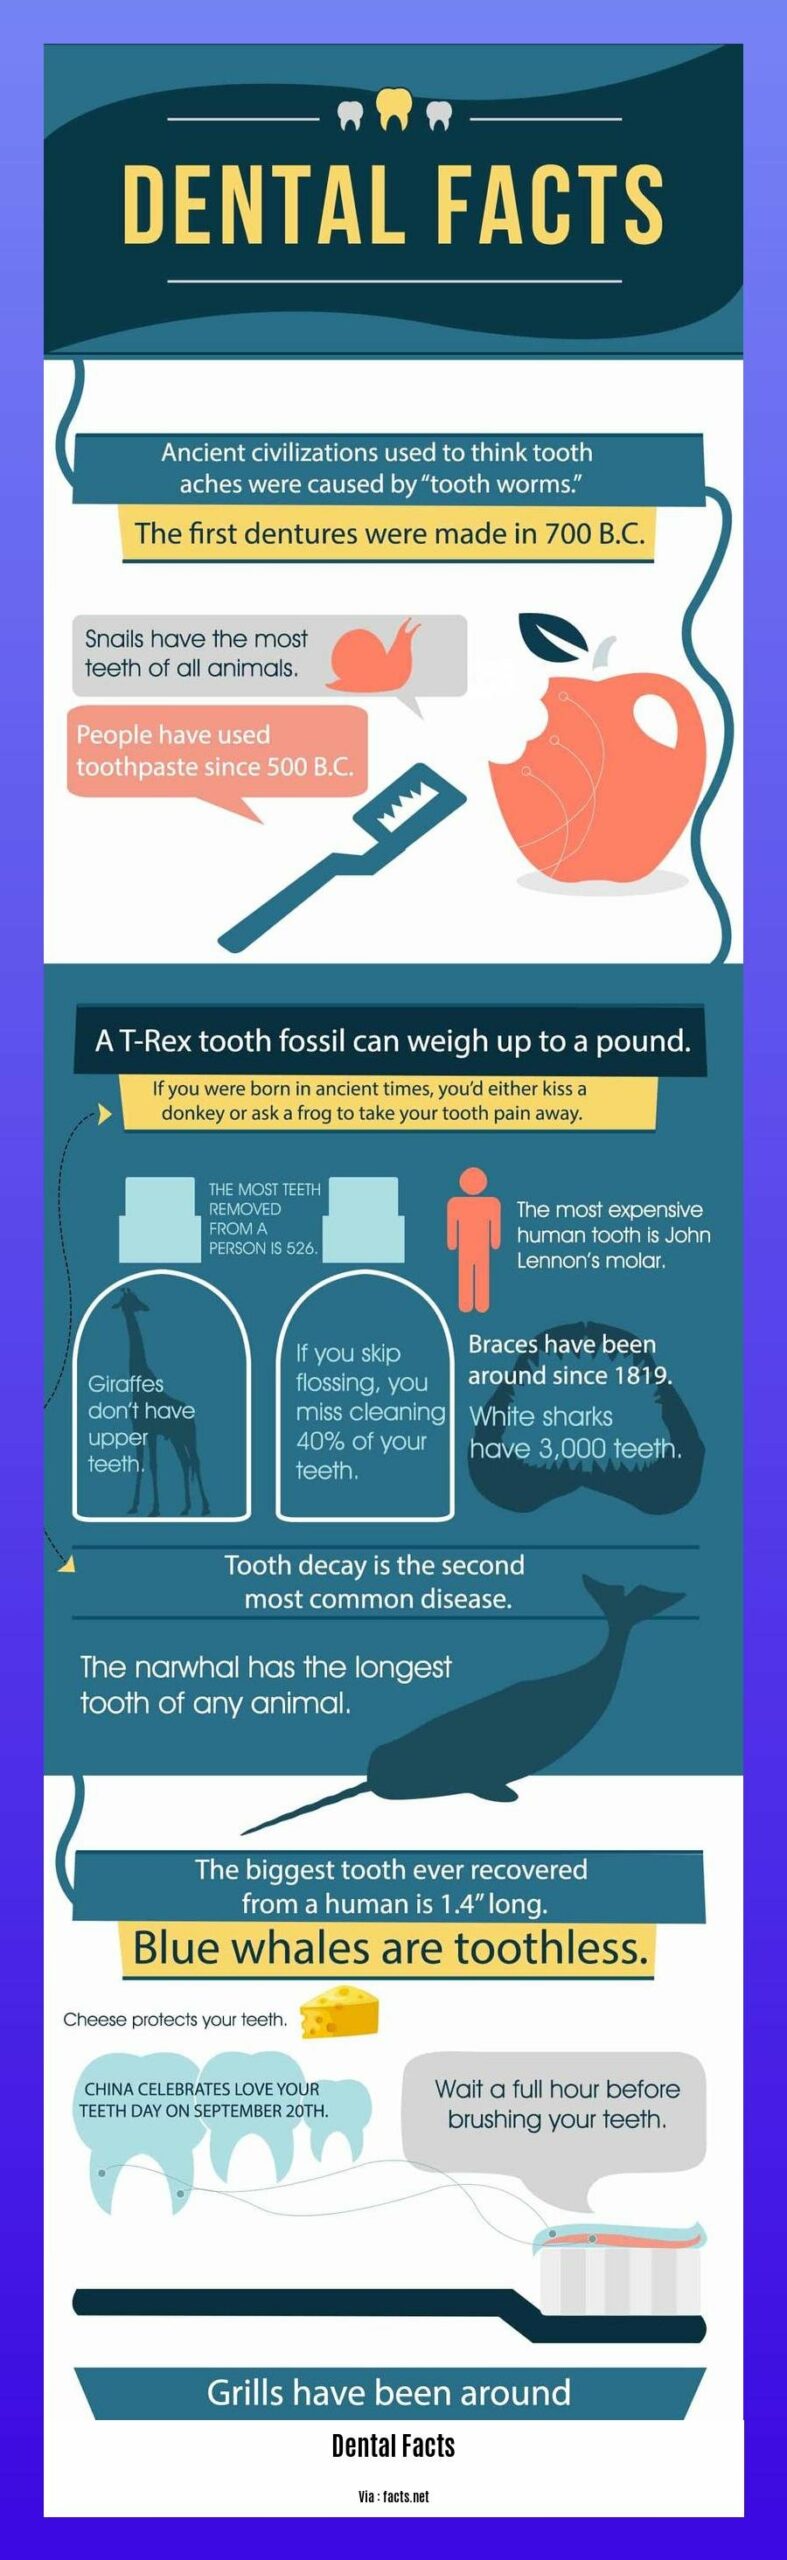 Did you know dental facts